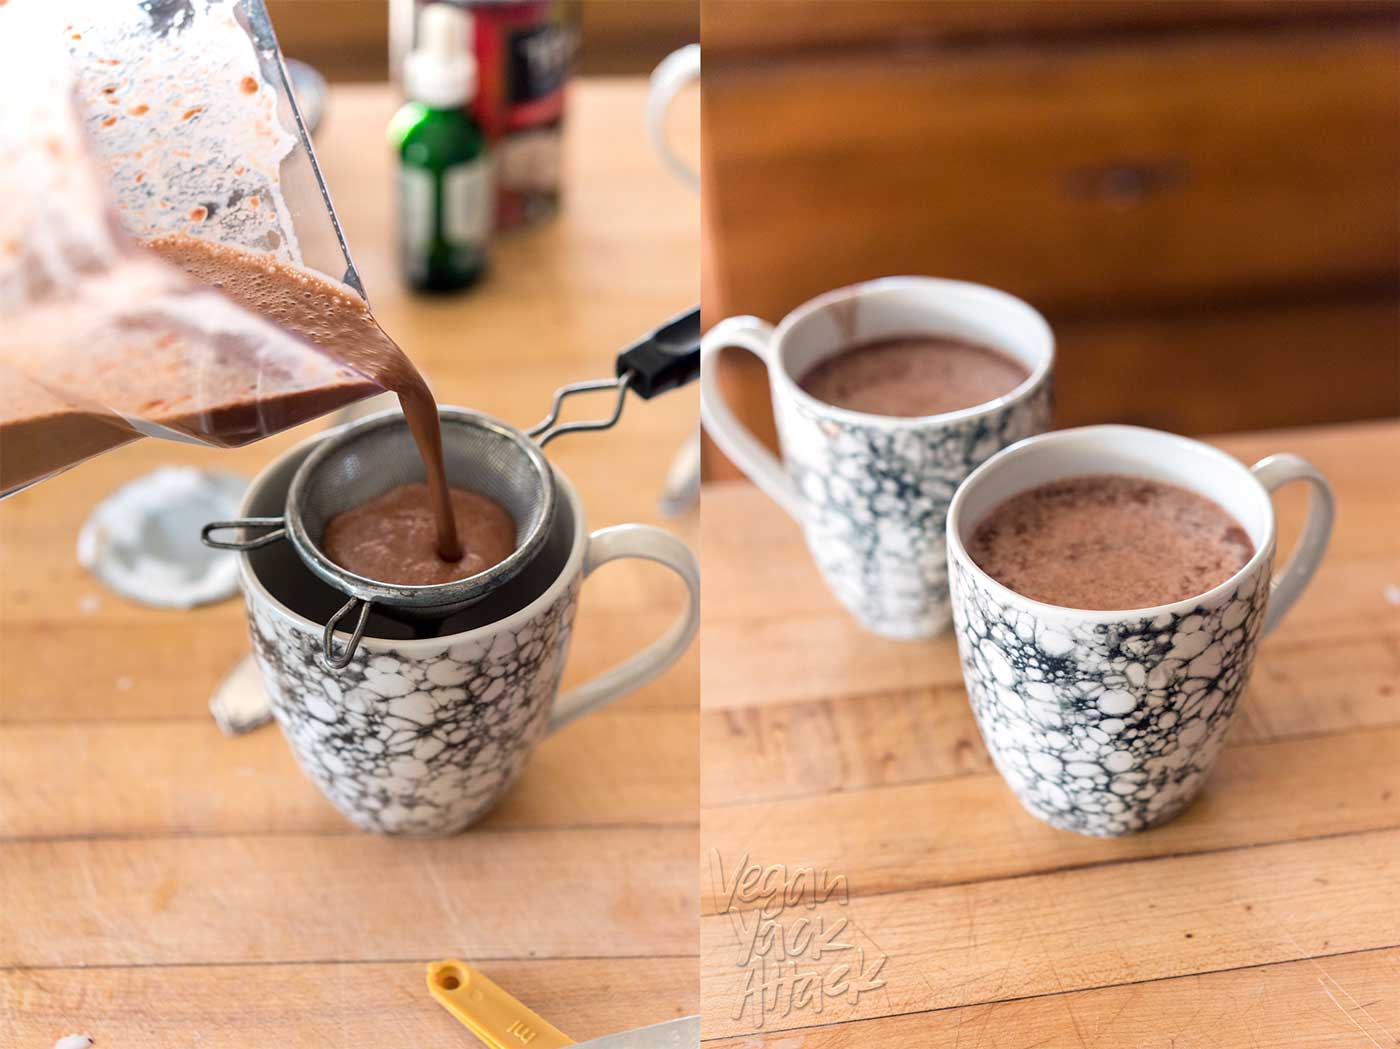 If you’re looking for the perfect, warming beverage for cool, winter nights, look no further than this dairy-free, sugar-free Raspberry Hot Cocoa! #vegan #lenoxusa #healthy #soyfree